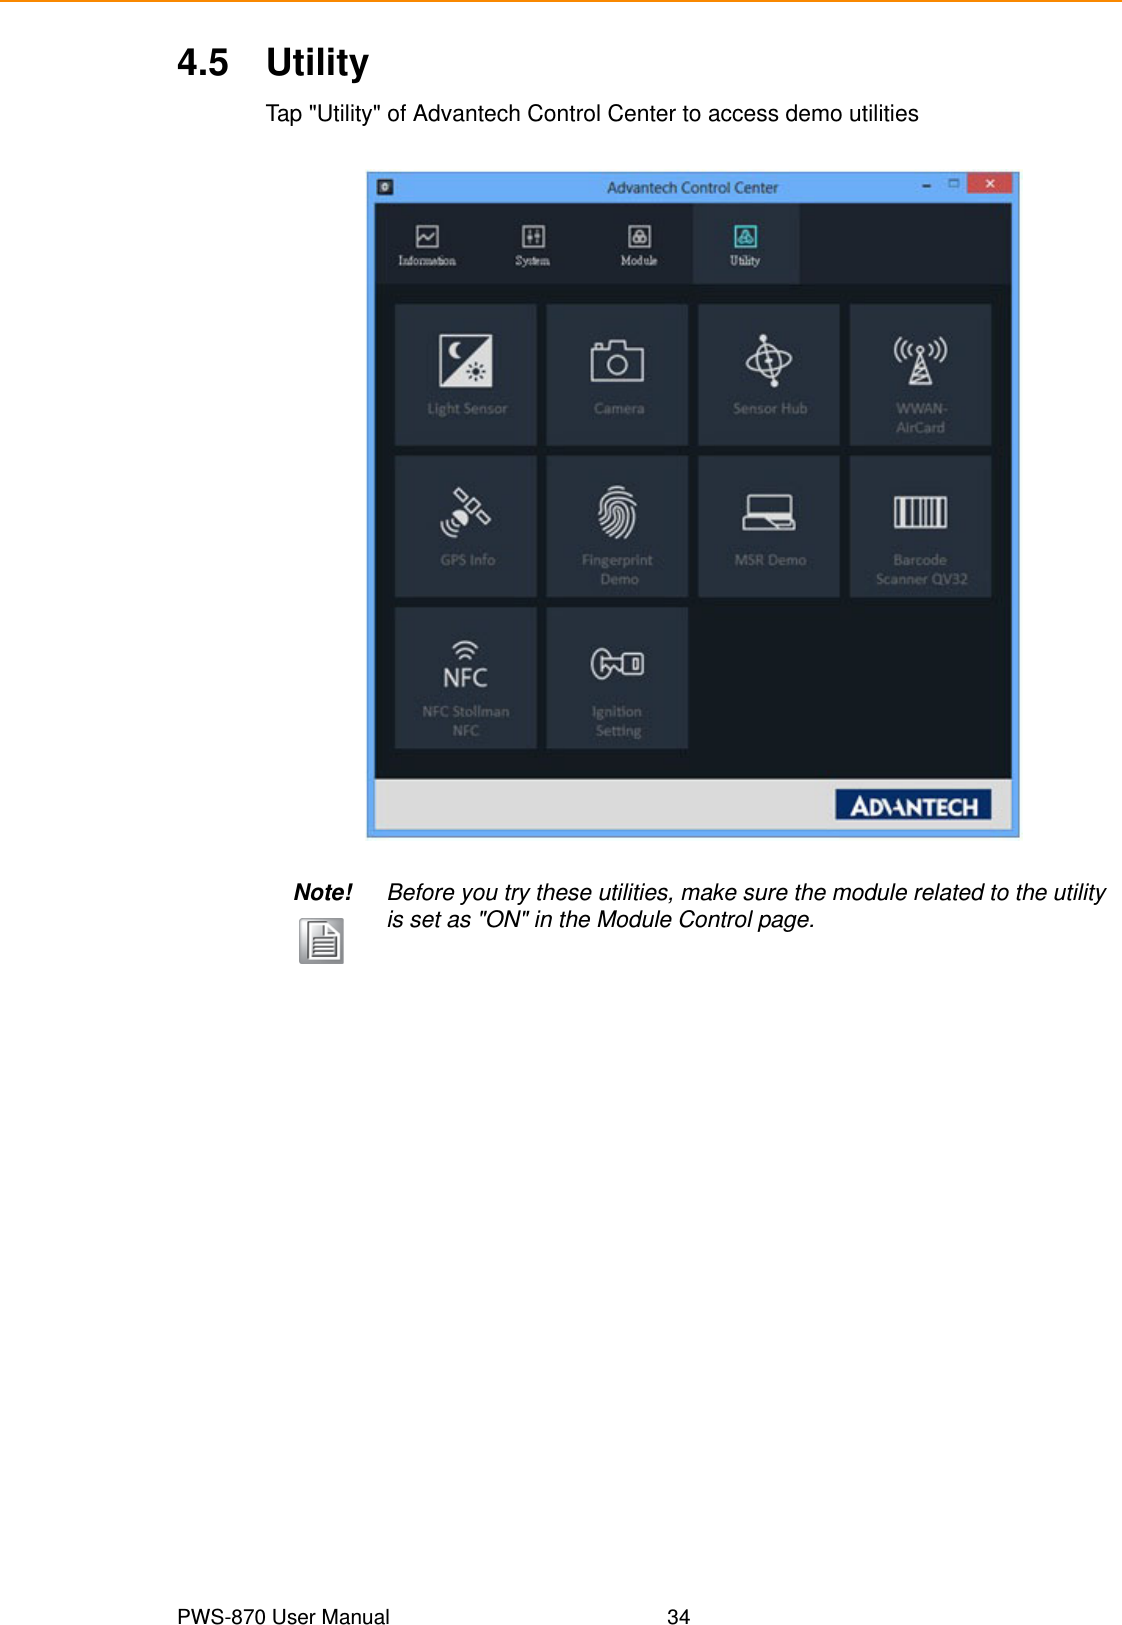 PWS-870 User Manual 344.5 UtilityTap &quot;Utility&quot; of Advantech Control Center to access demo utilitiesNote! Before you try these utilities, make sure the module related to the utility is set as &quot;ON&quot; in the Module Control page.